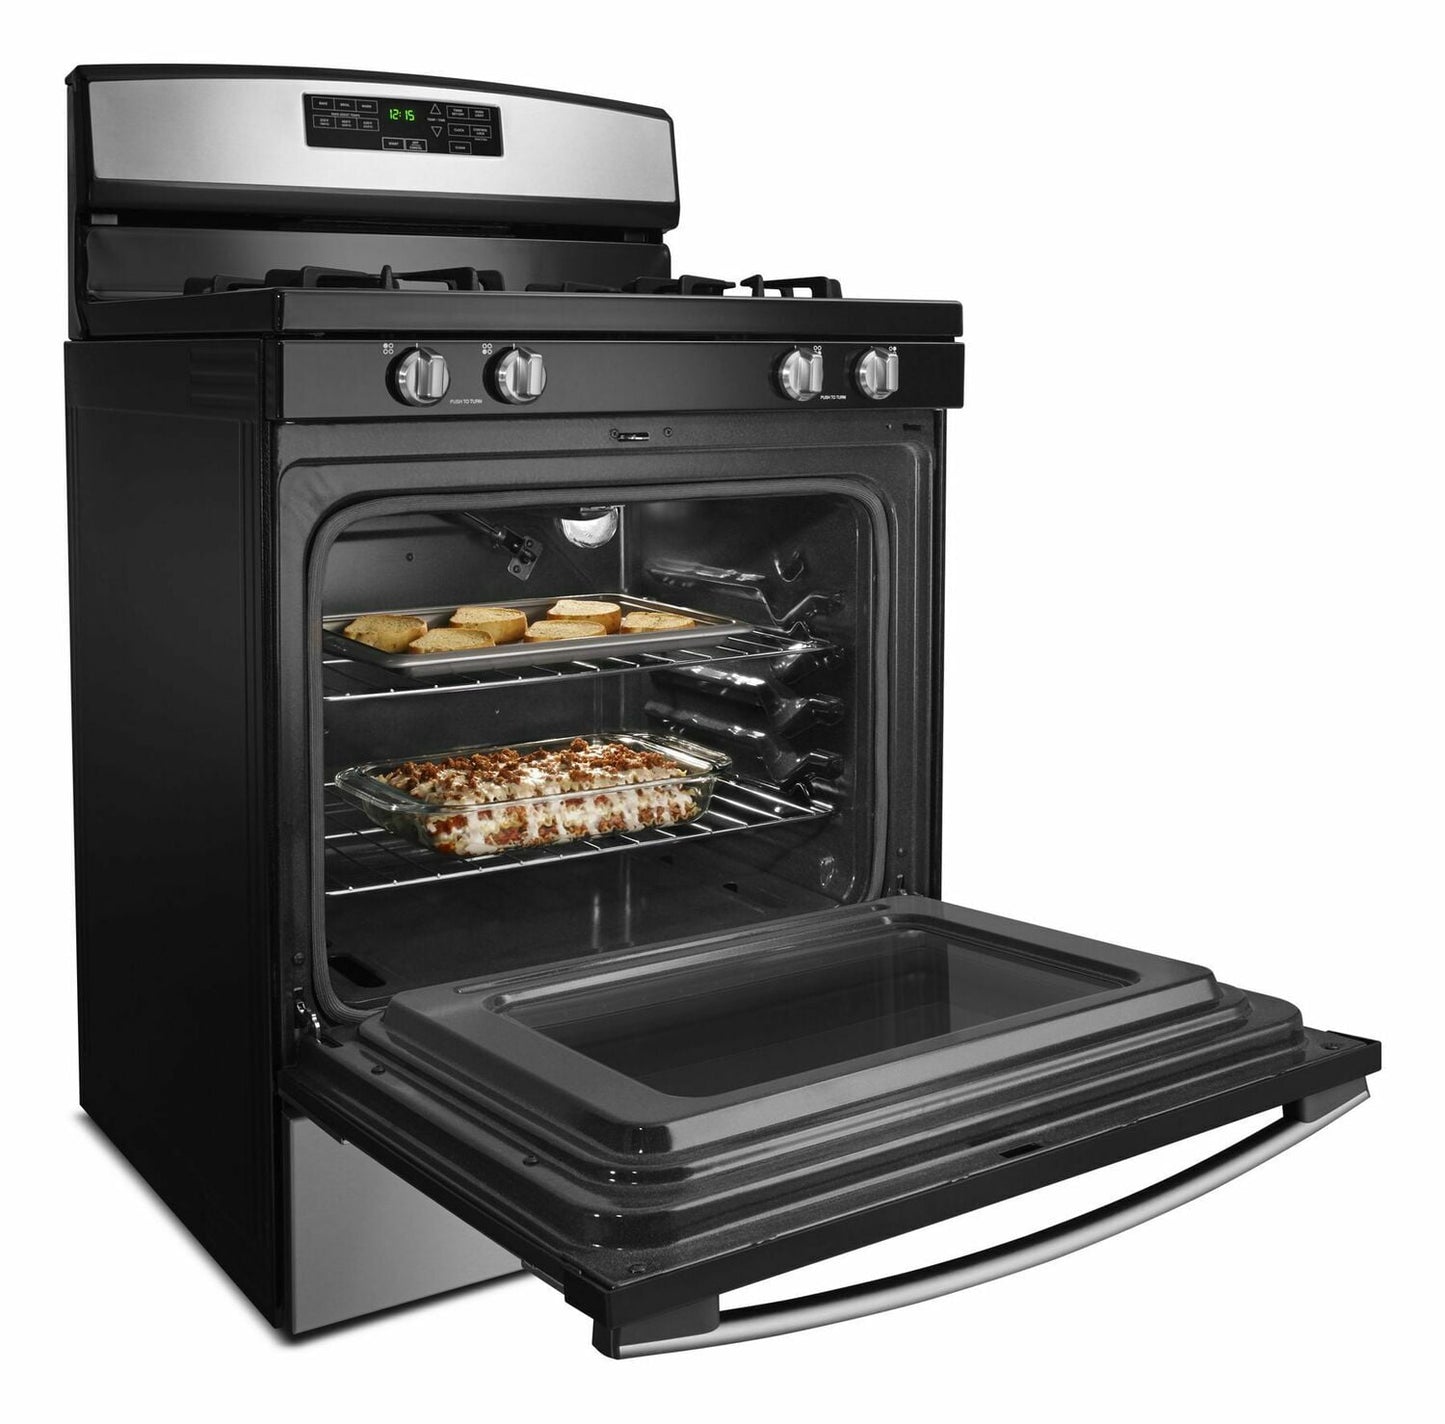 Amana AGR6603SFS 30-Inch Gas Range With Self-Clean Option - Black-On-Stainless